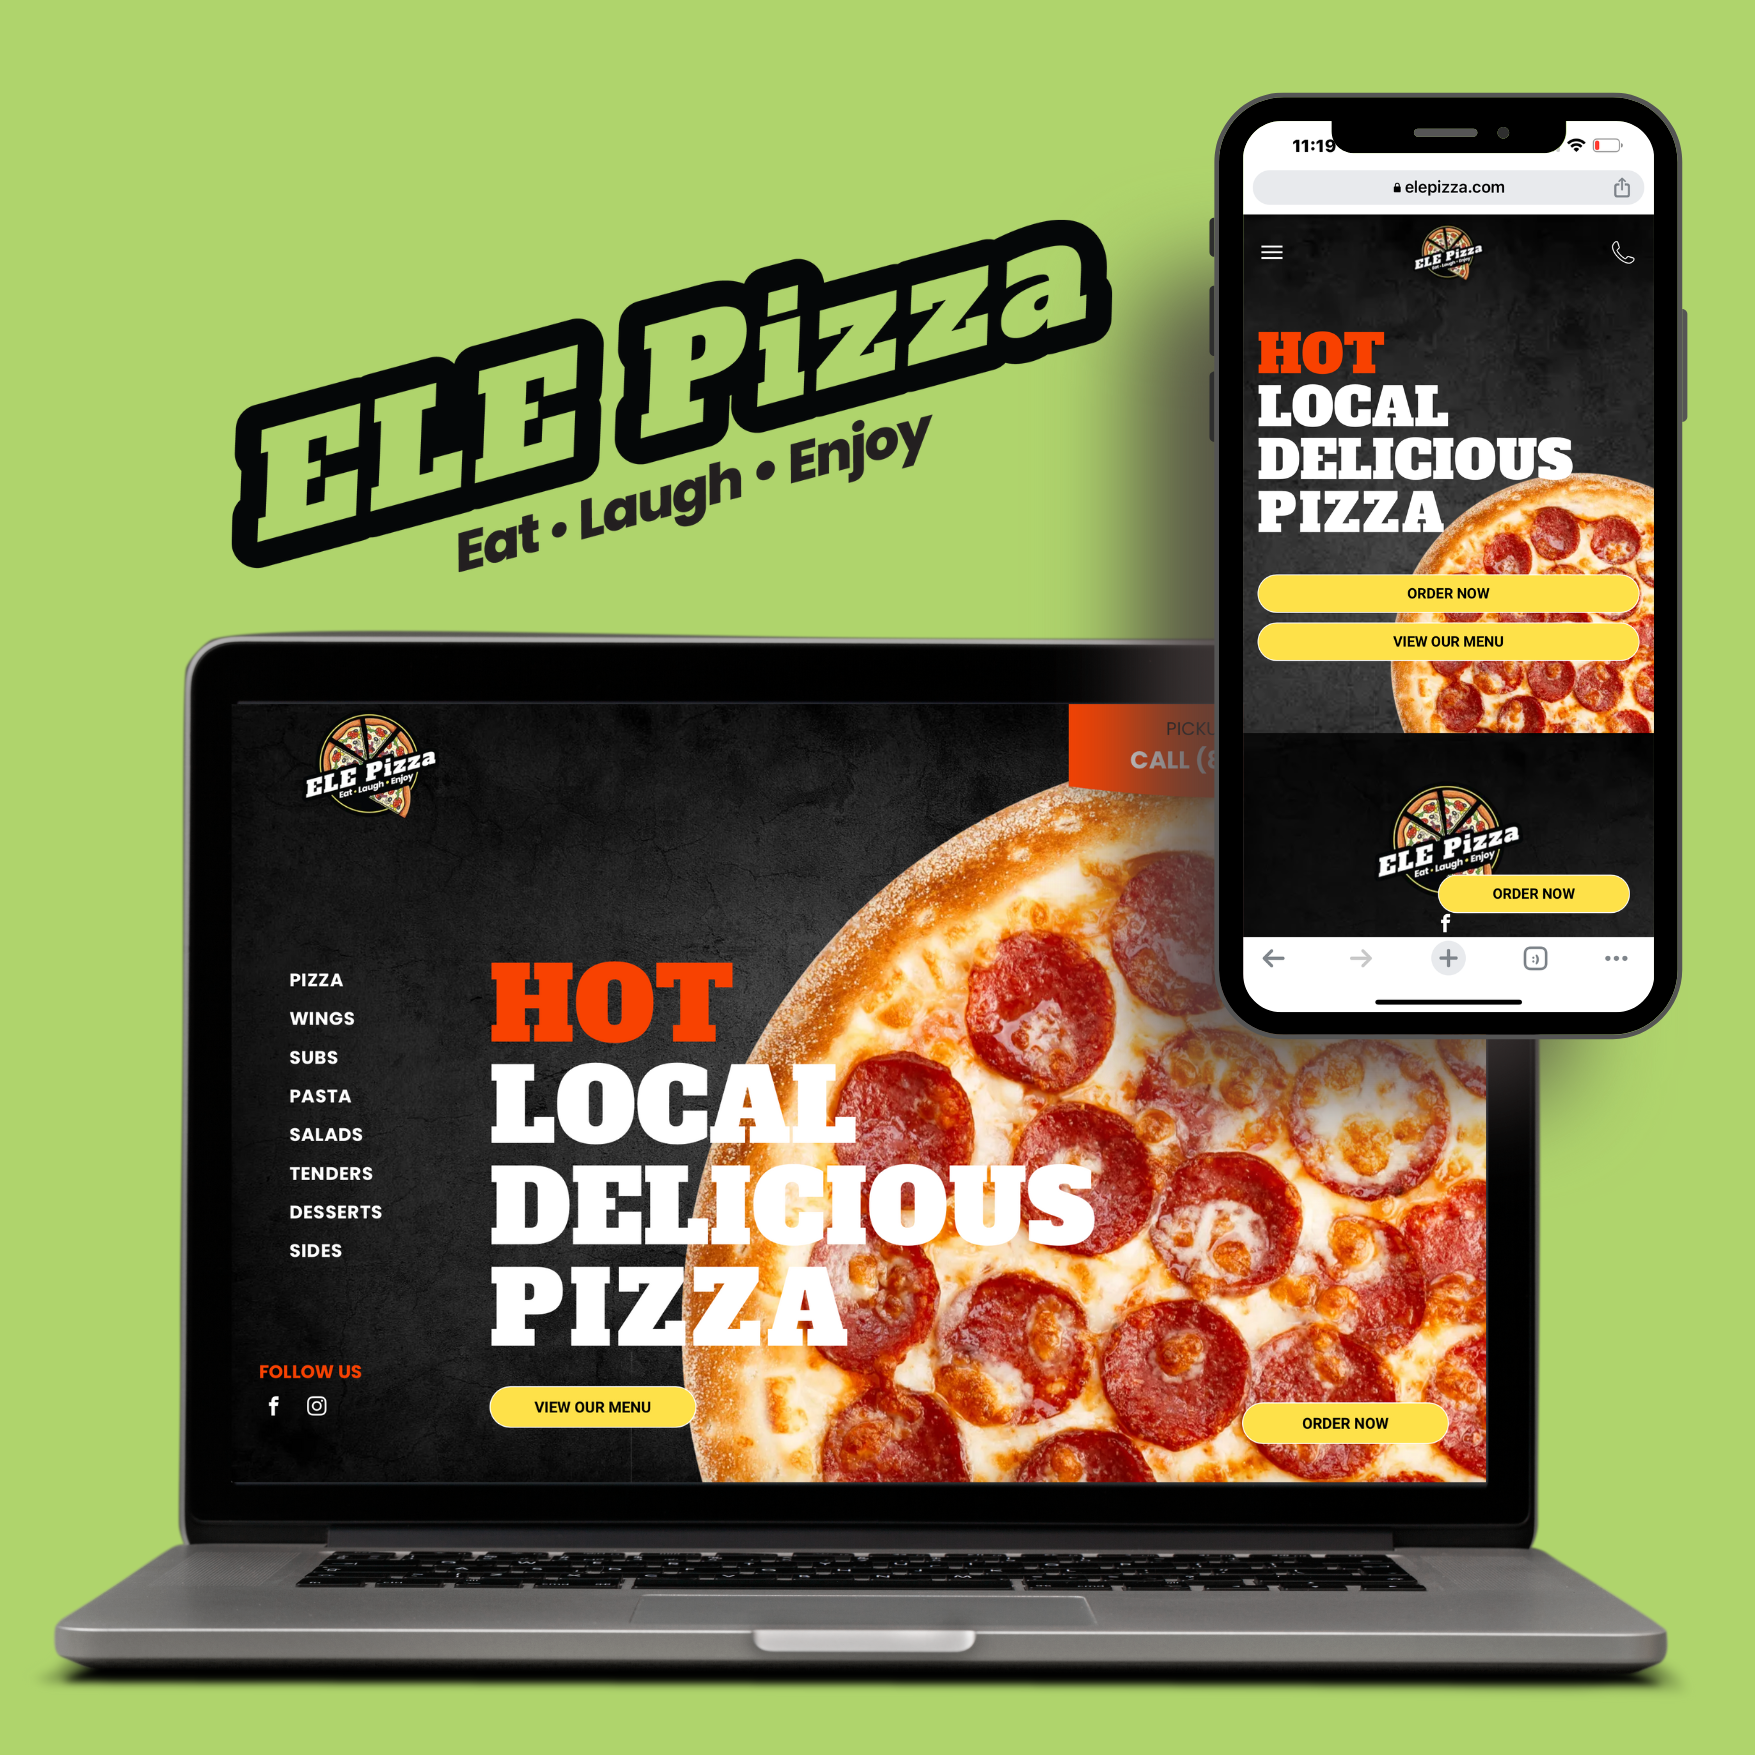 A laptop and a cell phone are shown for ele pizza